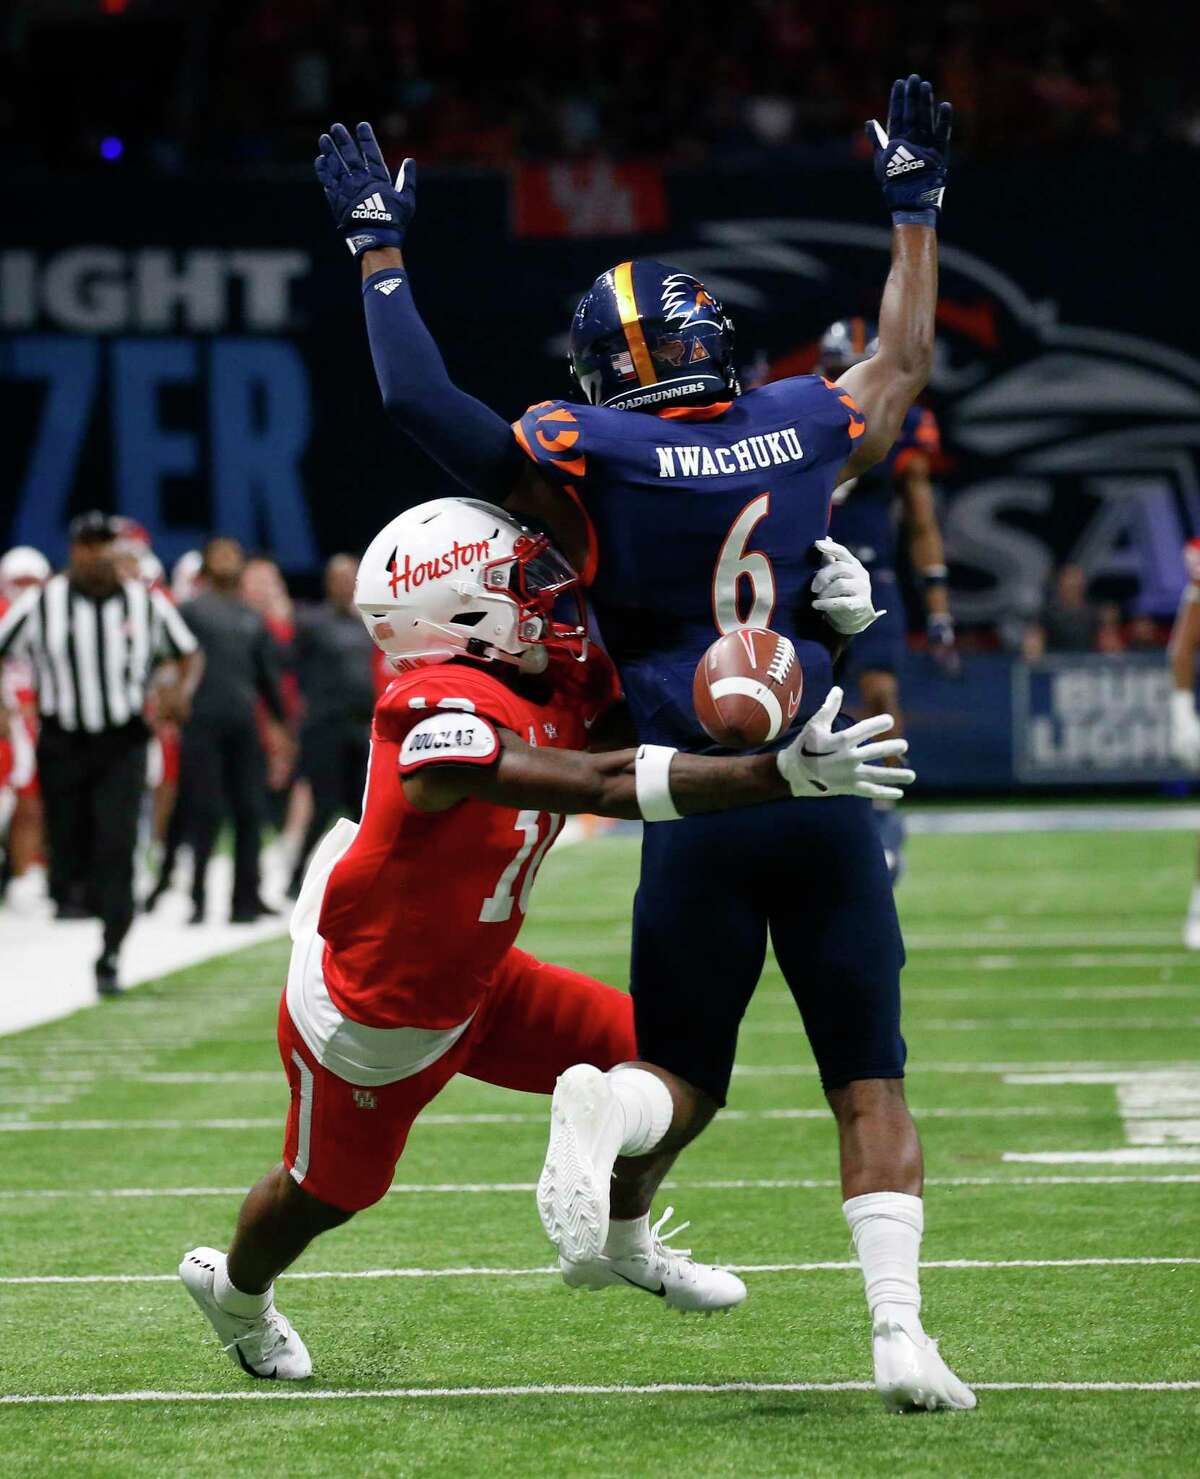 Houston wide receiver Matthew Golden tries to make a catch around UTSA Roadrunners safety Kelechi Nwachuku (6) on Saturday, Sept. 3, 2022 at the Alamodome. Interference was called on the play